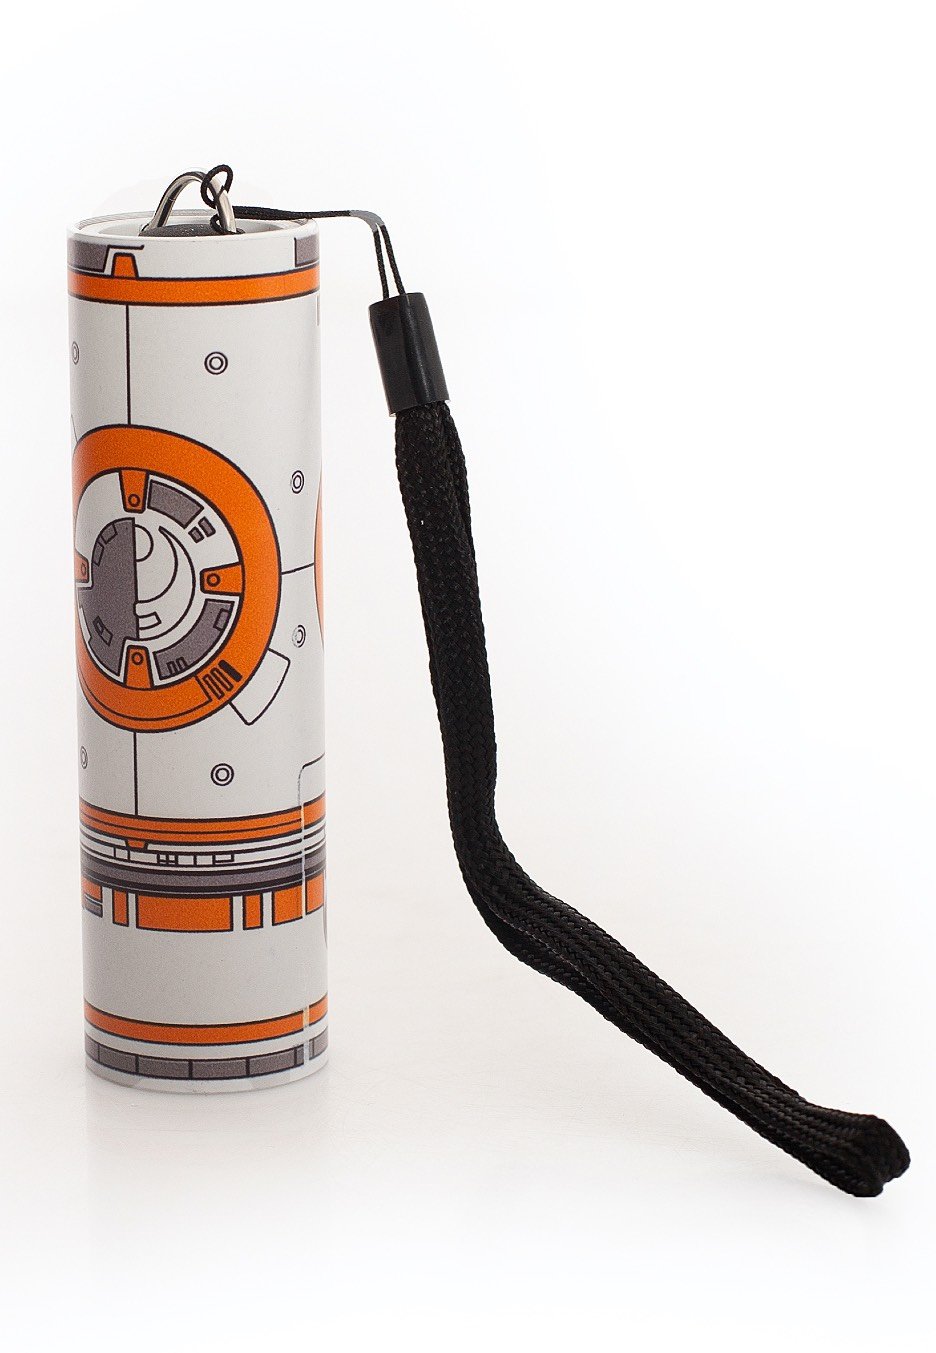 Star Wars - BB 8 Projection - Torch